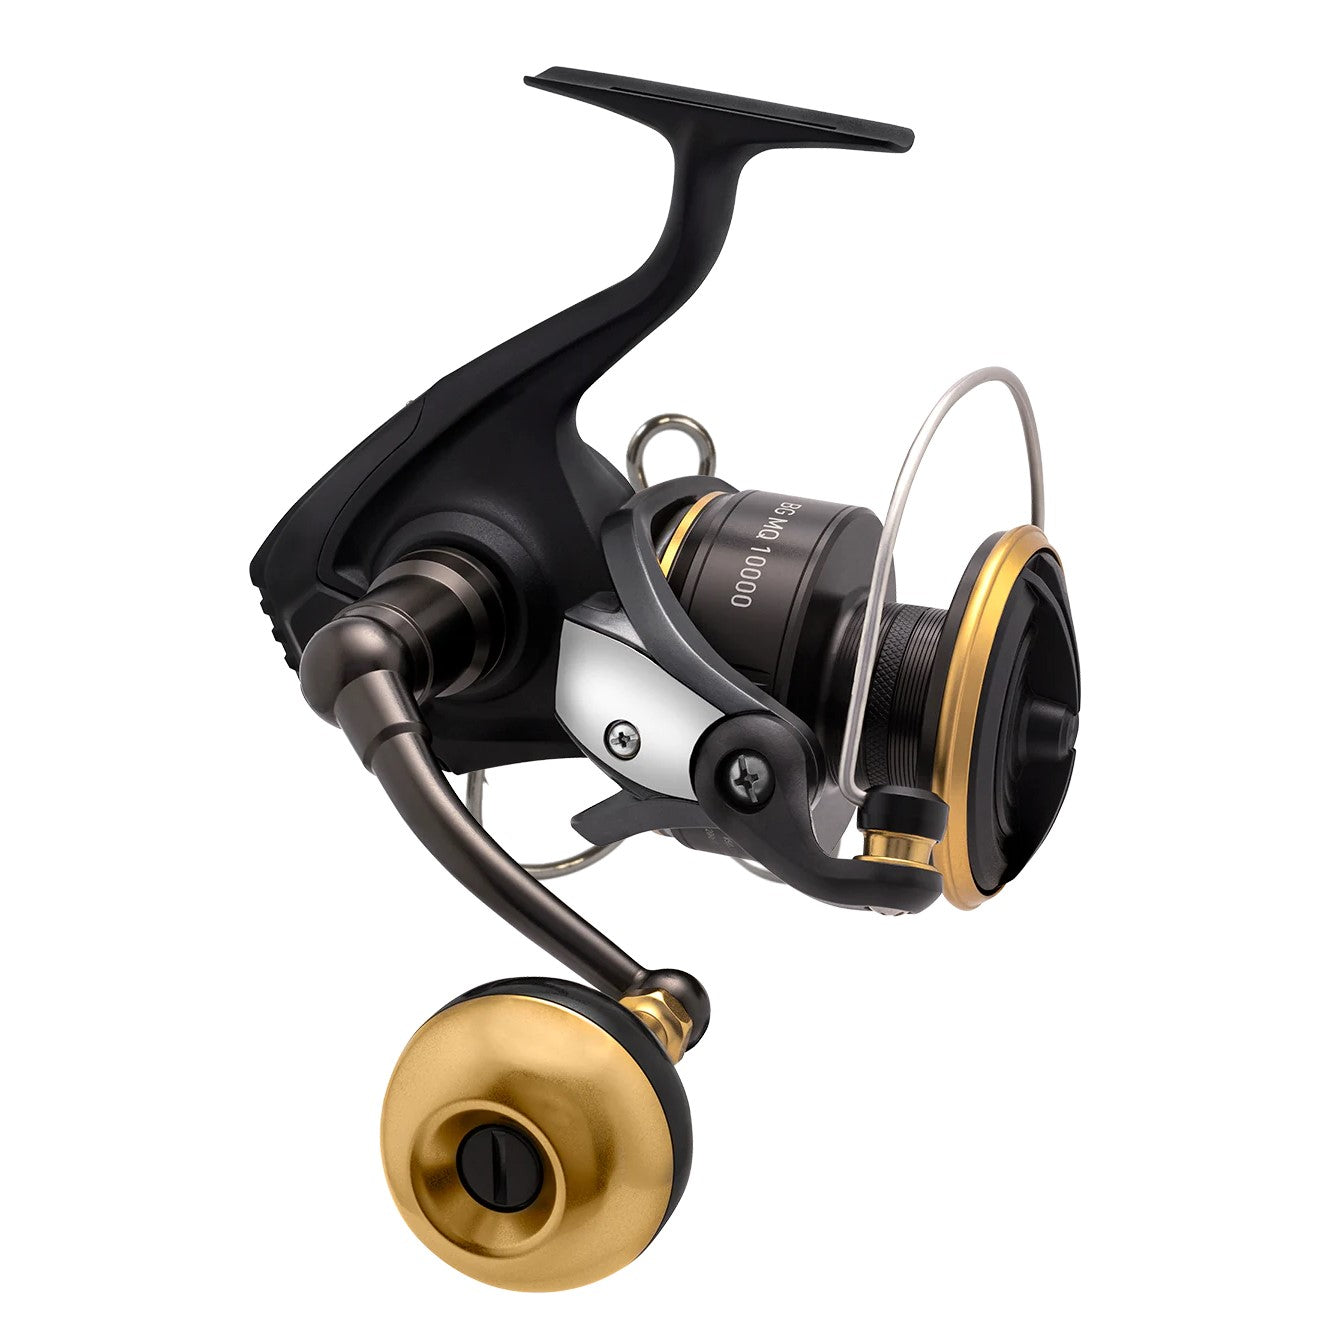 Is the Daiwa BG still king in the ~$100 category? - Page 4 - Main